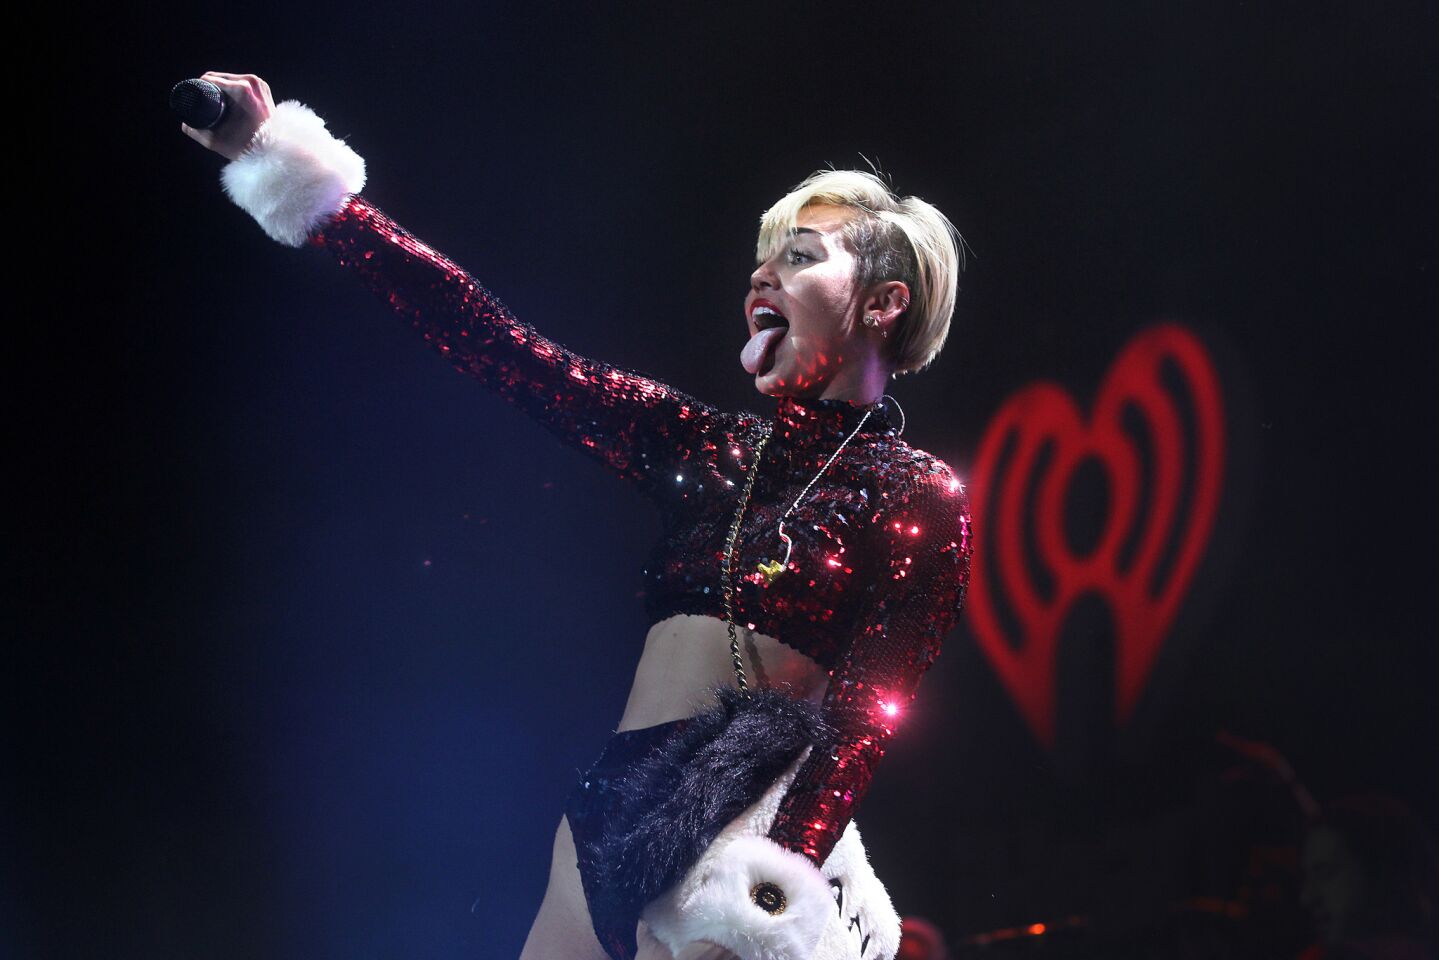 Miley landed on Santa's naughty list the night of her Jingle Ball performance. Well, actually she landed right on Santa when she twerked for him. The tongue-loving musician also managed to lick the Christmas tree. With her powerful vocal chords, Miley rocked the stage with takes on "Party in the U.S.A.," Lana Del Rey's "Summertime Sadness," and "Wrecking Ball."